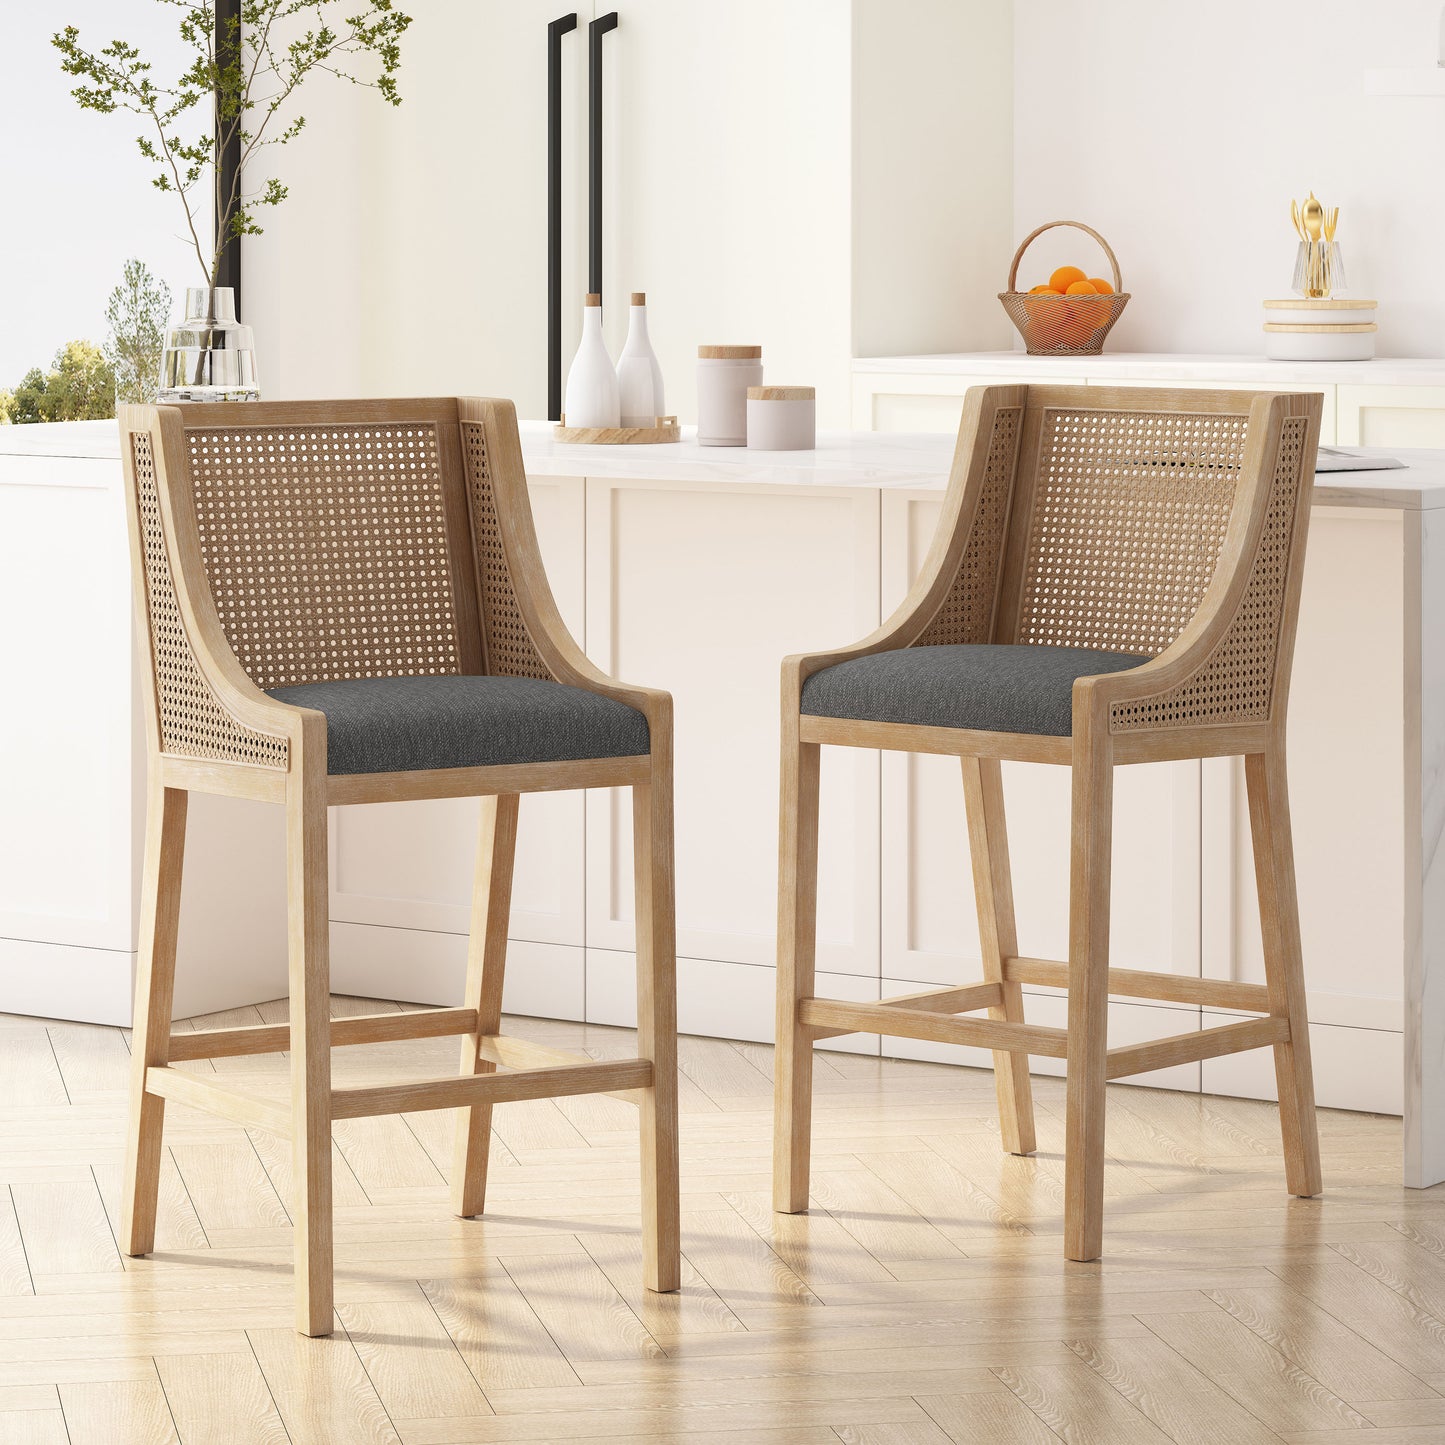 Oneida Rustic Fabric Upholstered Wood and Cane 30 inch Barstools (Set of 2)